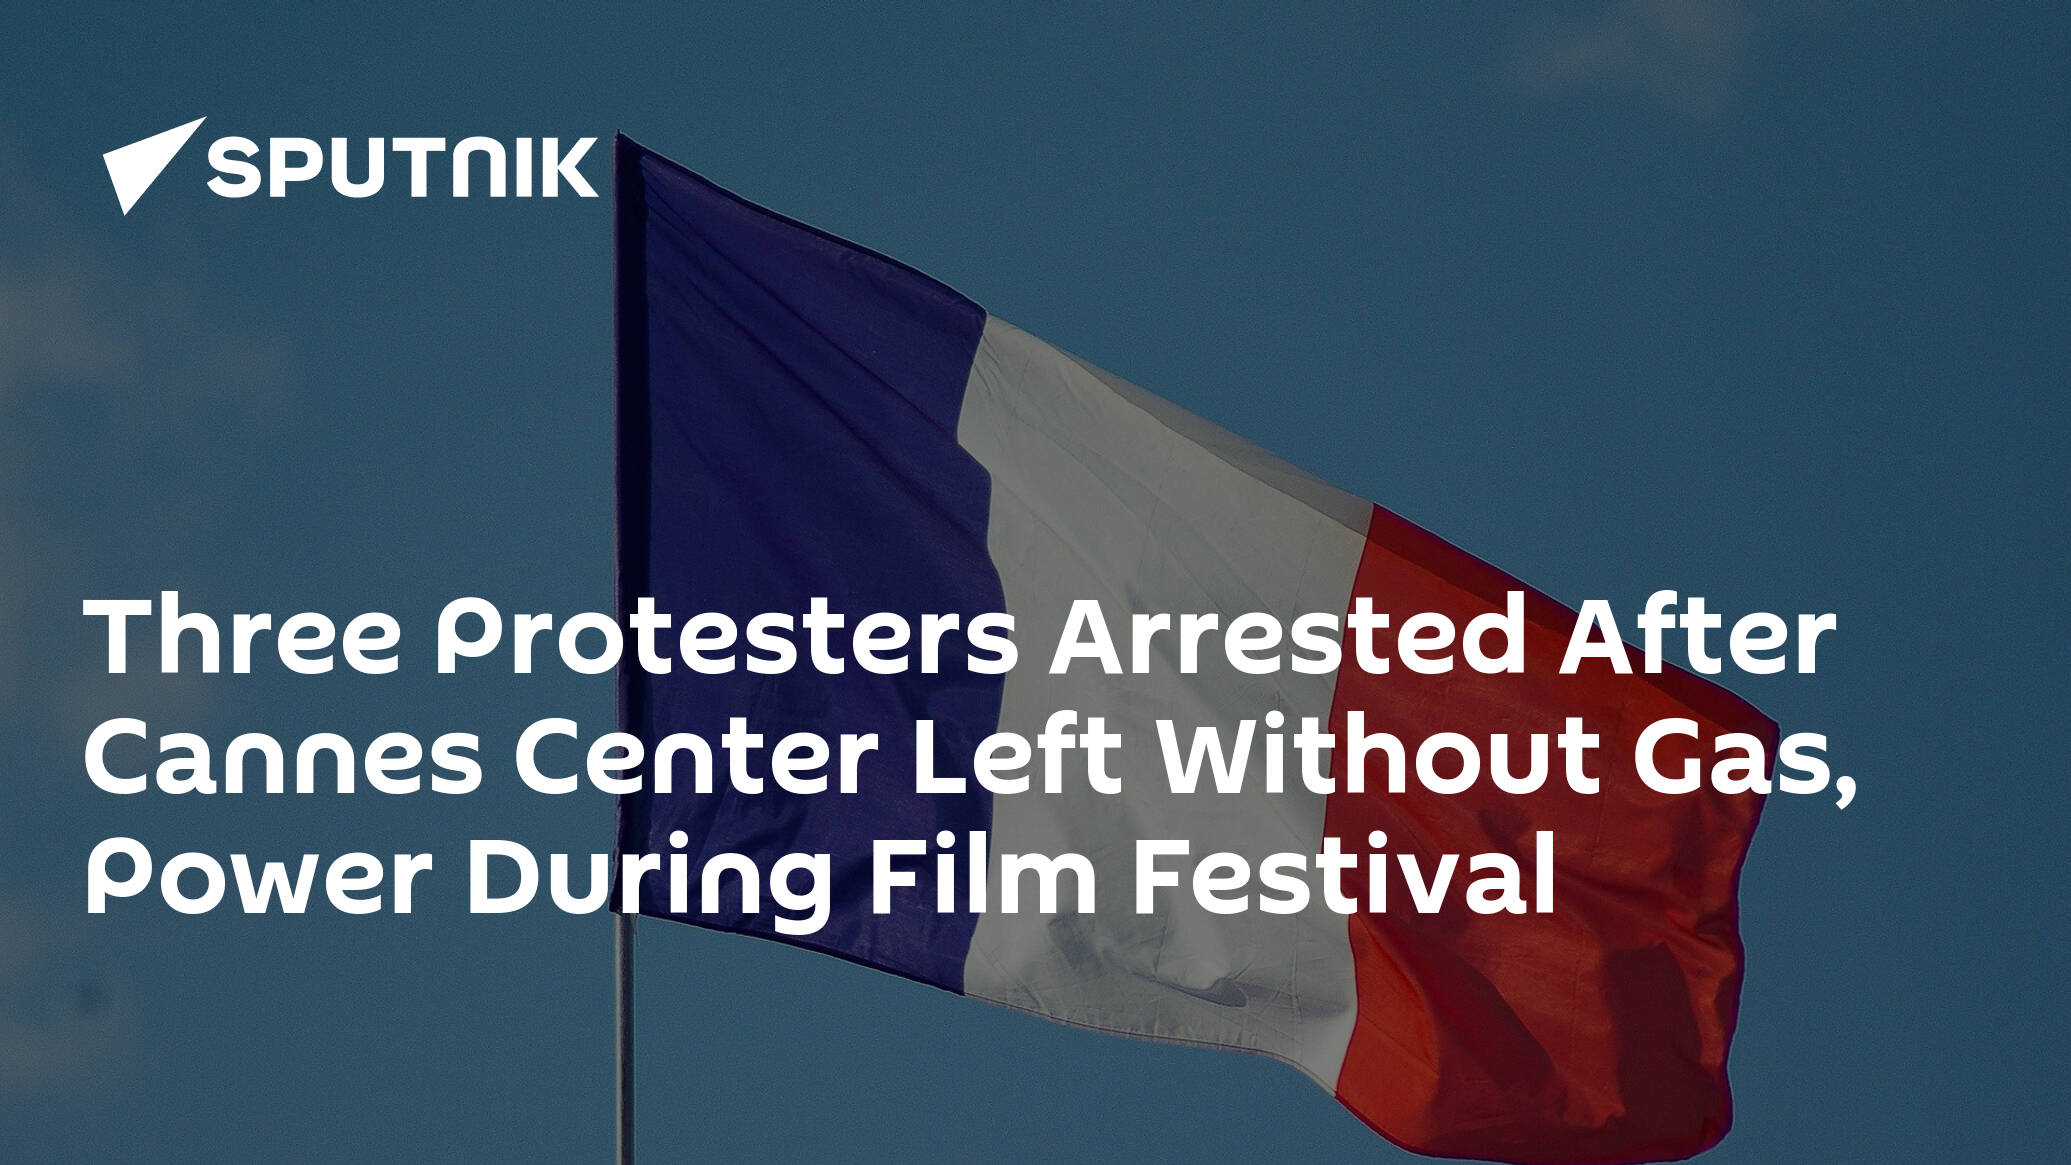 Three Protesters Arrested After Cannes Center Left Without Gas, Power During Film Festival